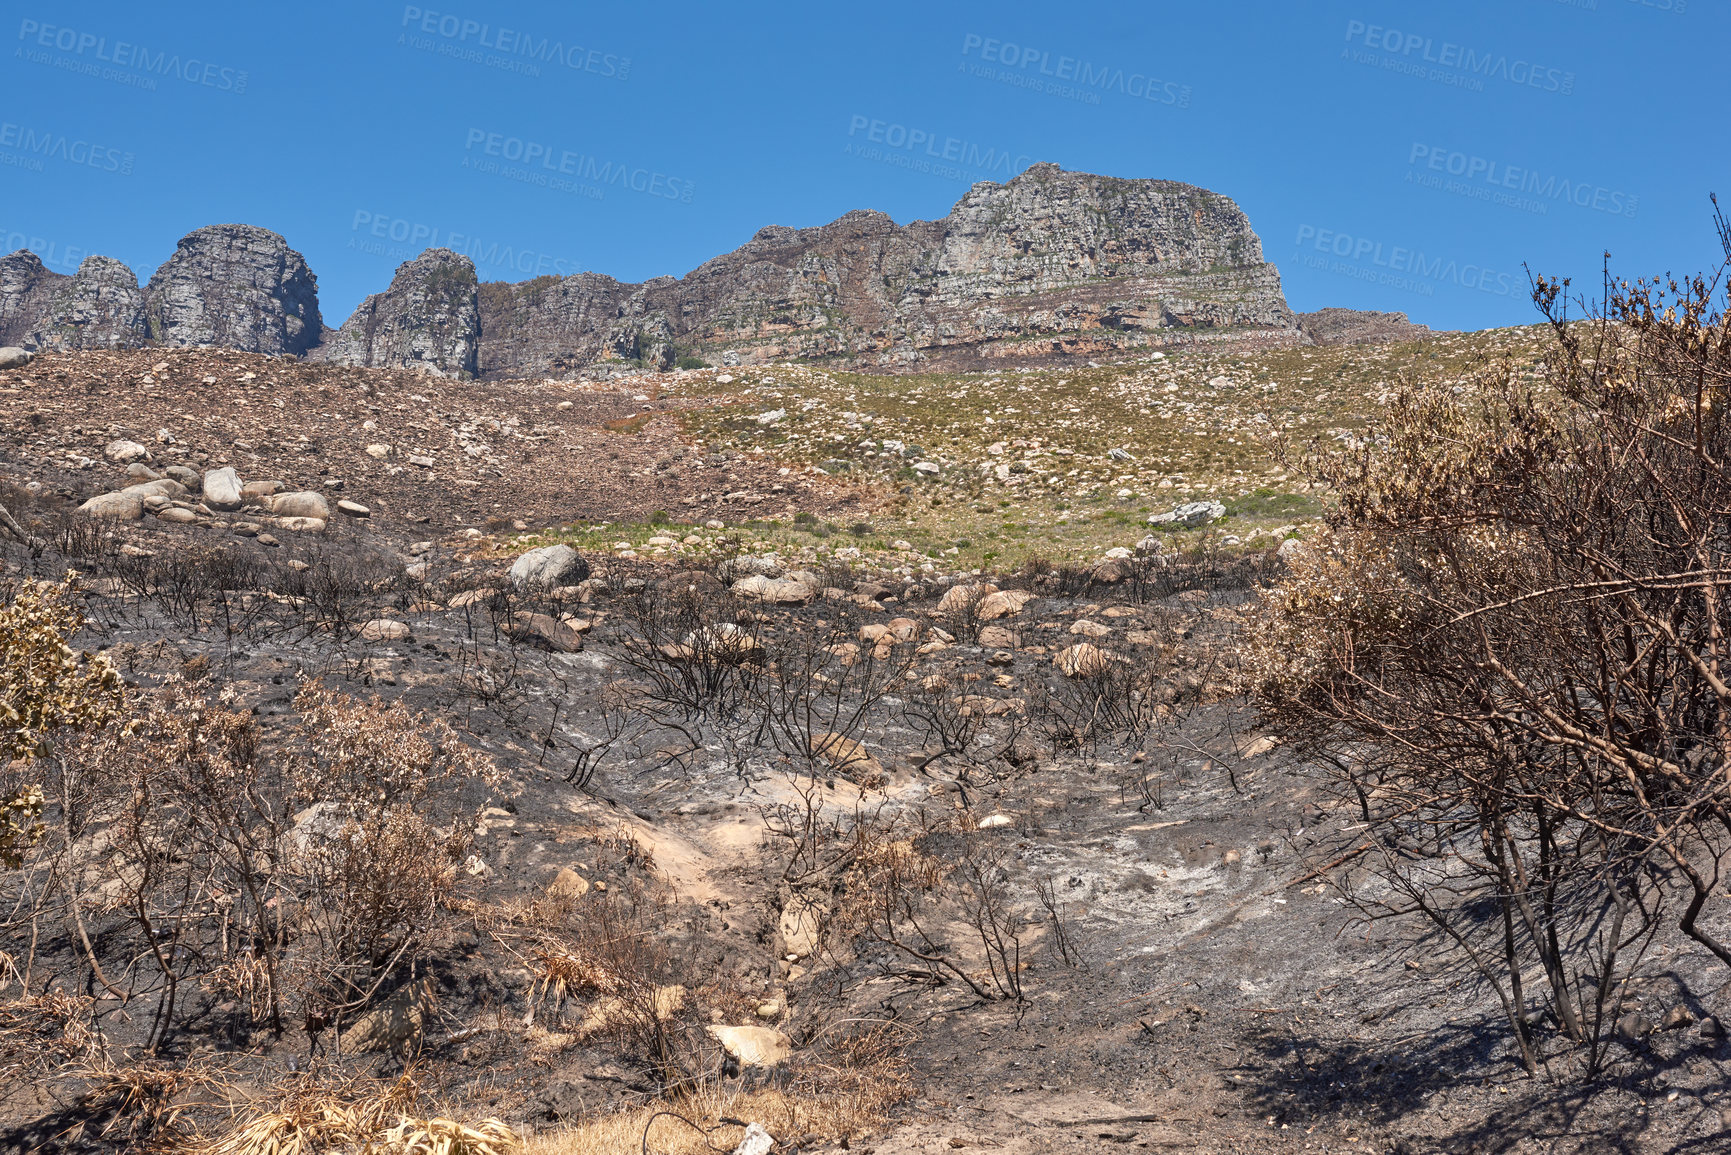 Buy stock photo Burnt bushes and vegetation on a mountain after a fire disaster. The aftermath of a natural mountain landscape destroyed by wildfire destruction on Twelve Apostles in Cape Town, South Africa.